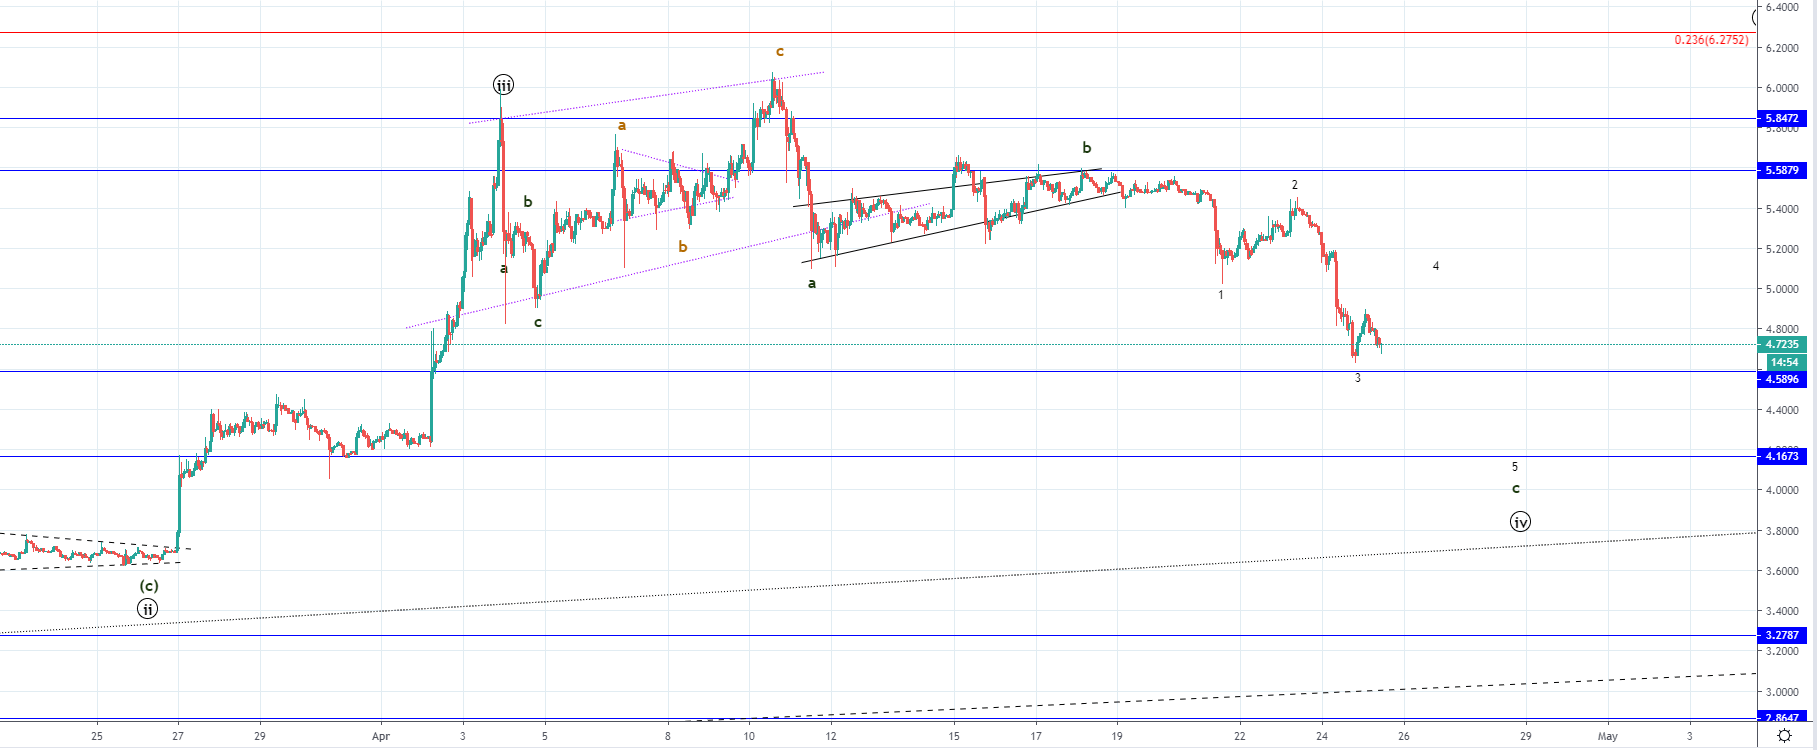 LTC/USD and EOS/USD - more downside expected as the correction develops fully